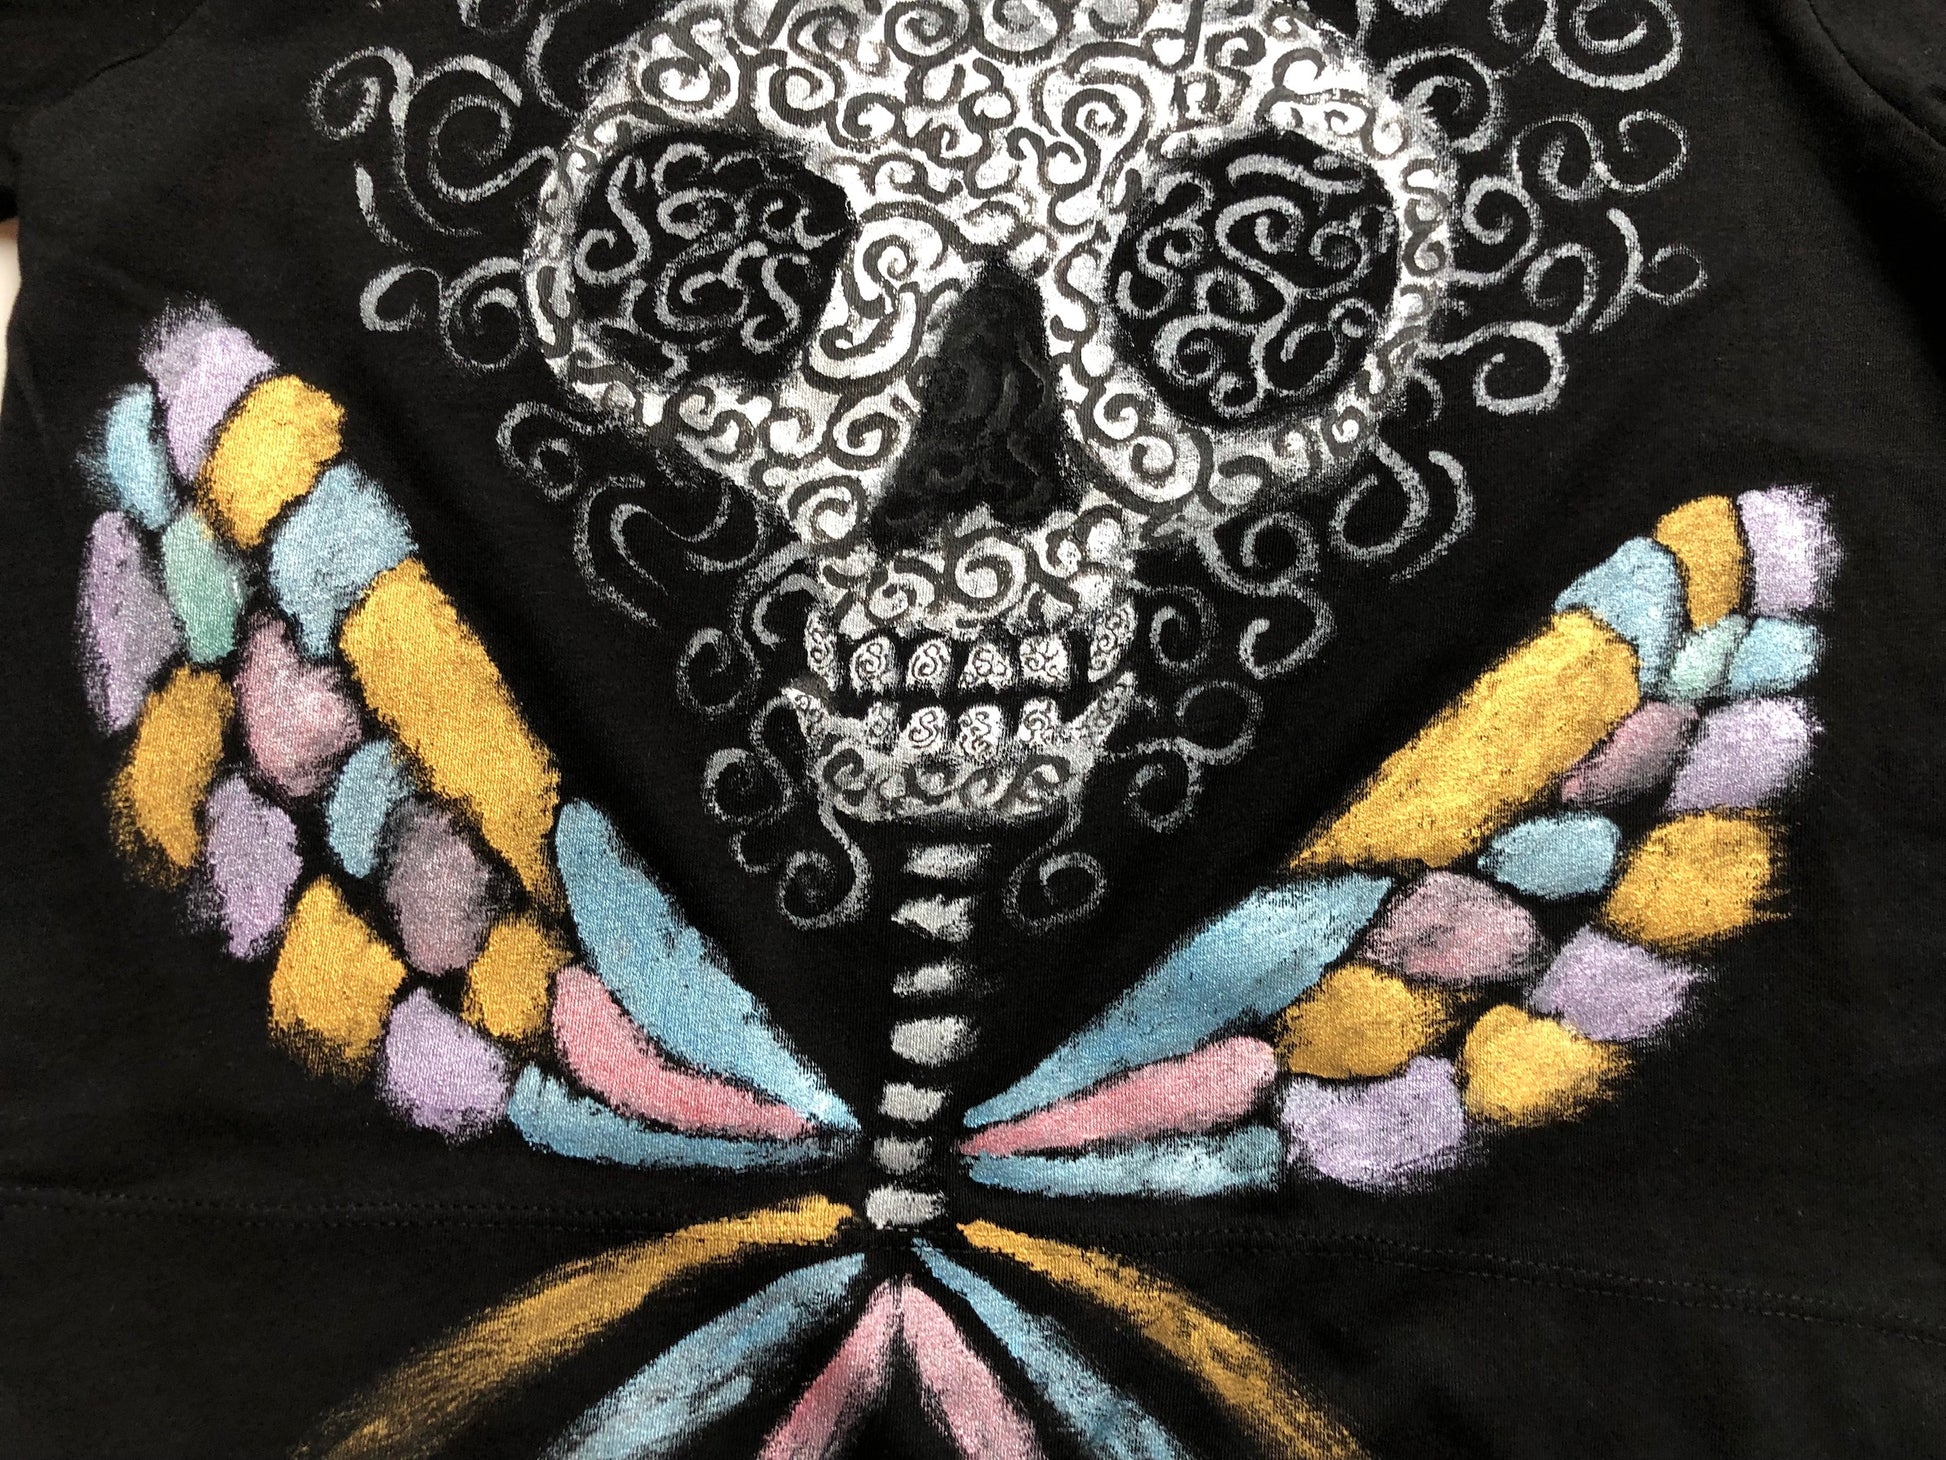 Drawing and skulls with teeth and patterns on a blouse